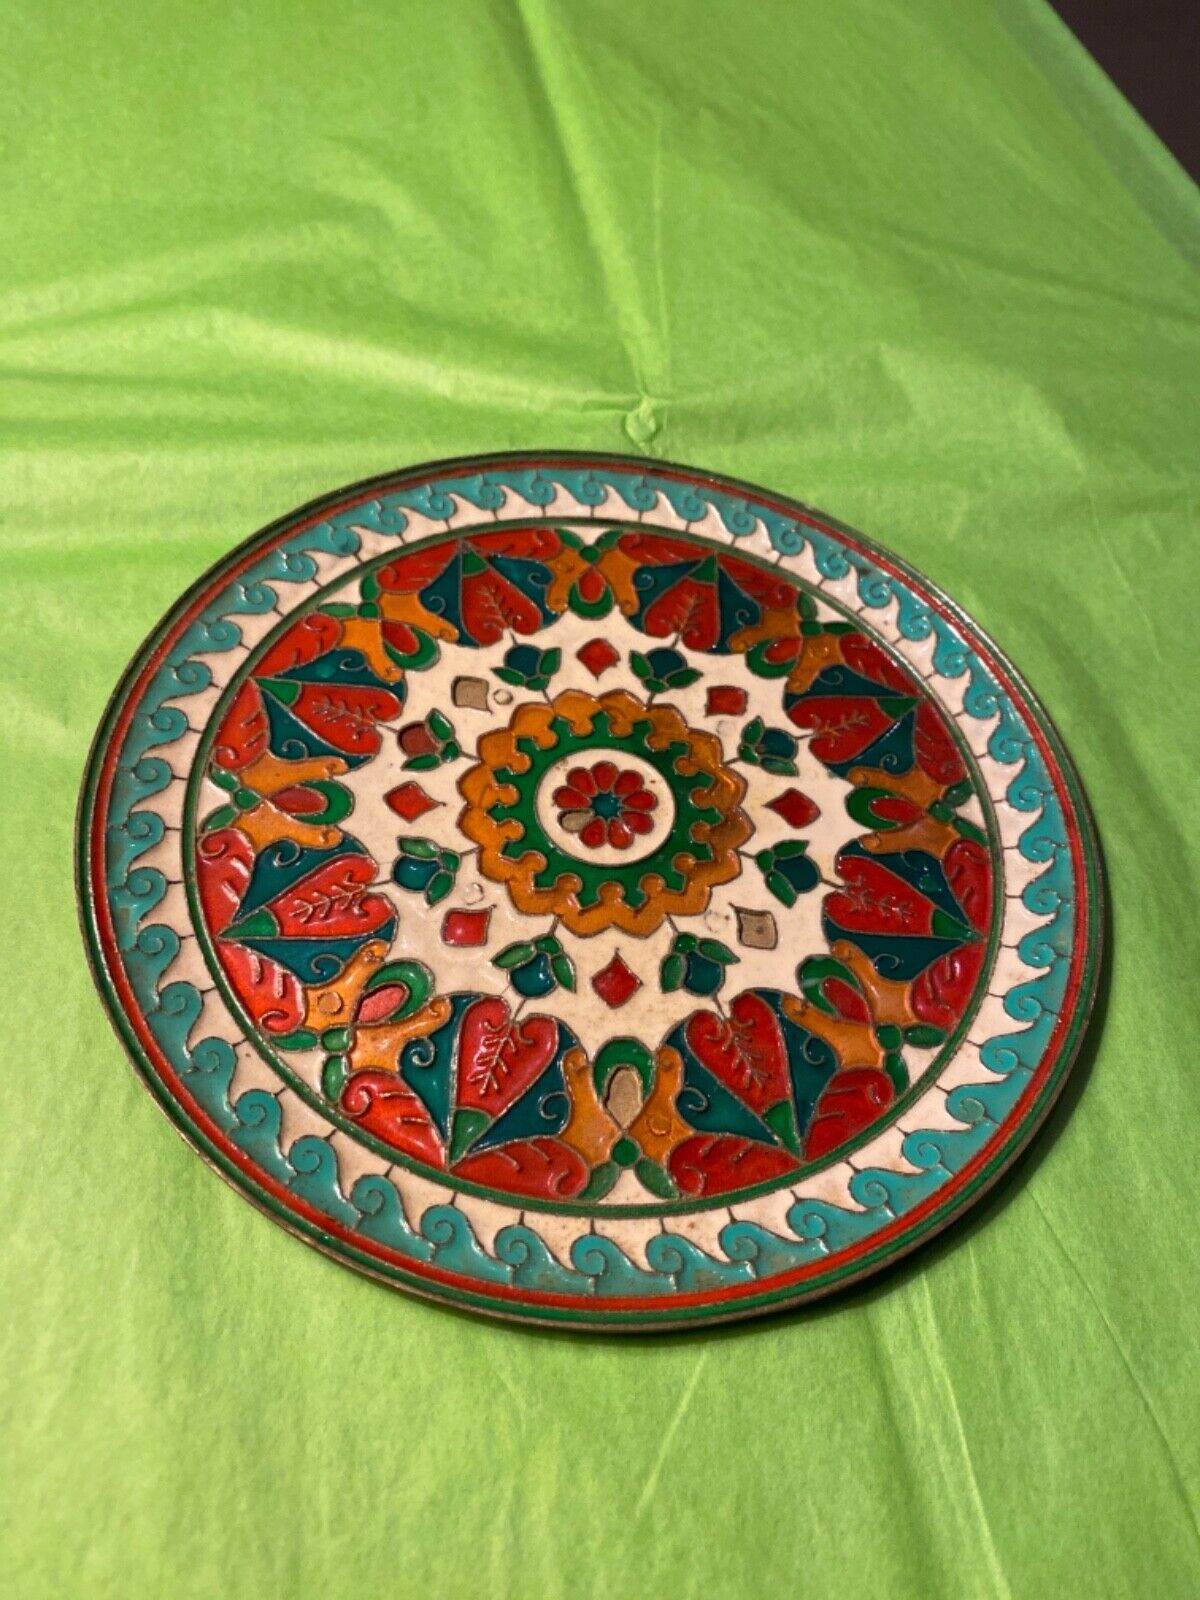 VINTAGE 1970’S HAND MADE IN GREECE COLORFUL BRONZE PLATE 6 1/2”